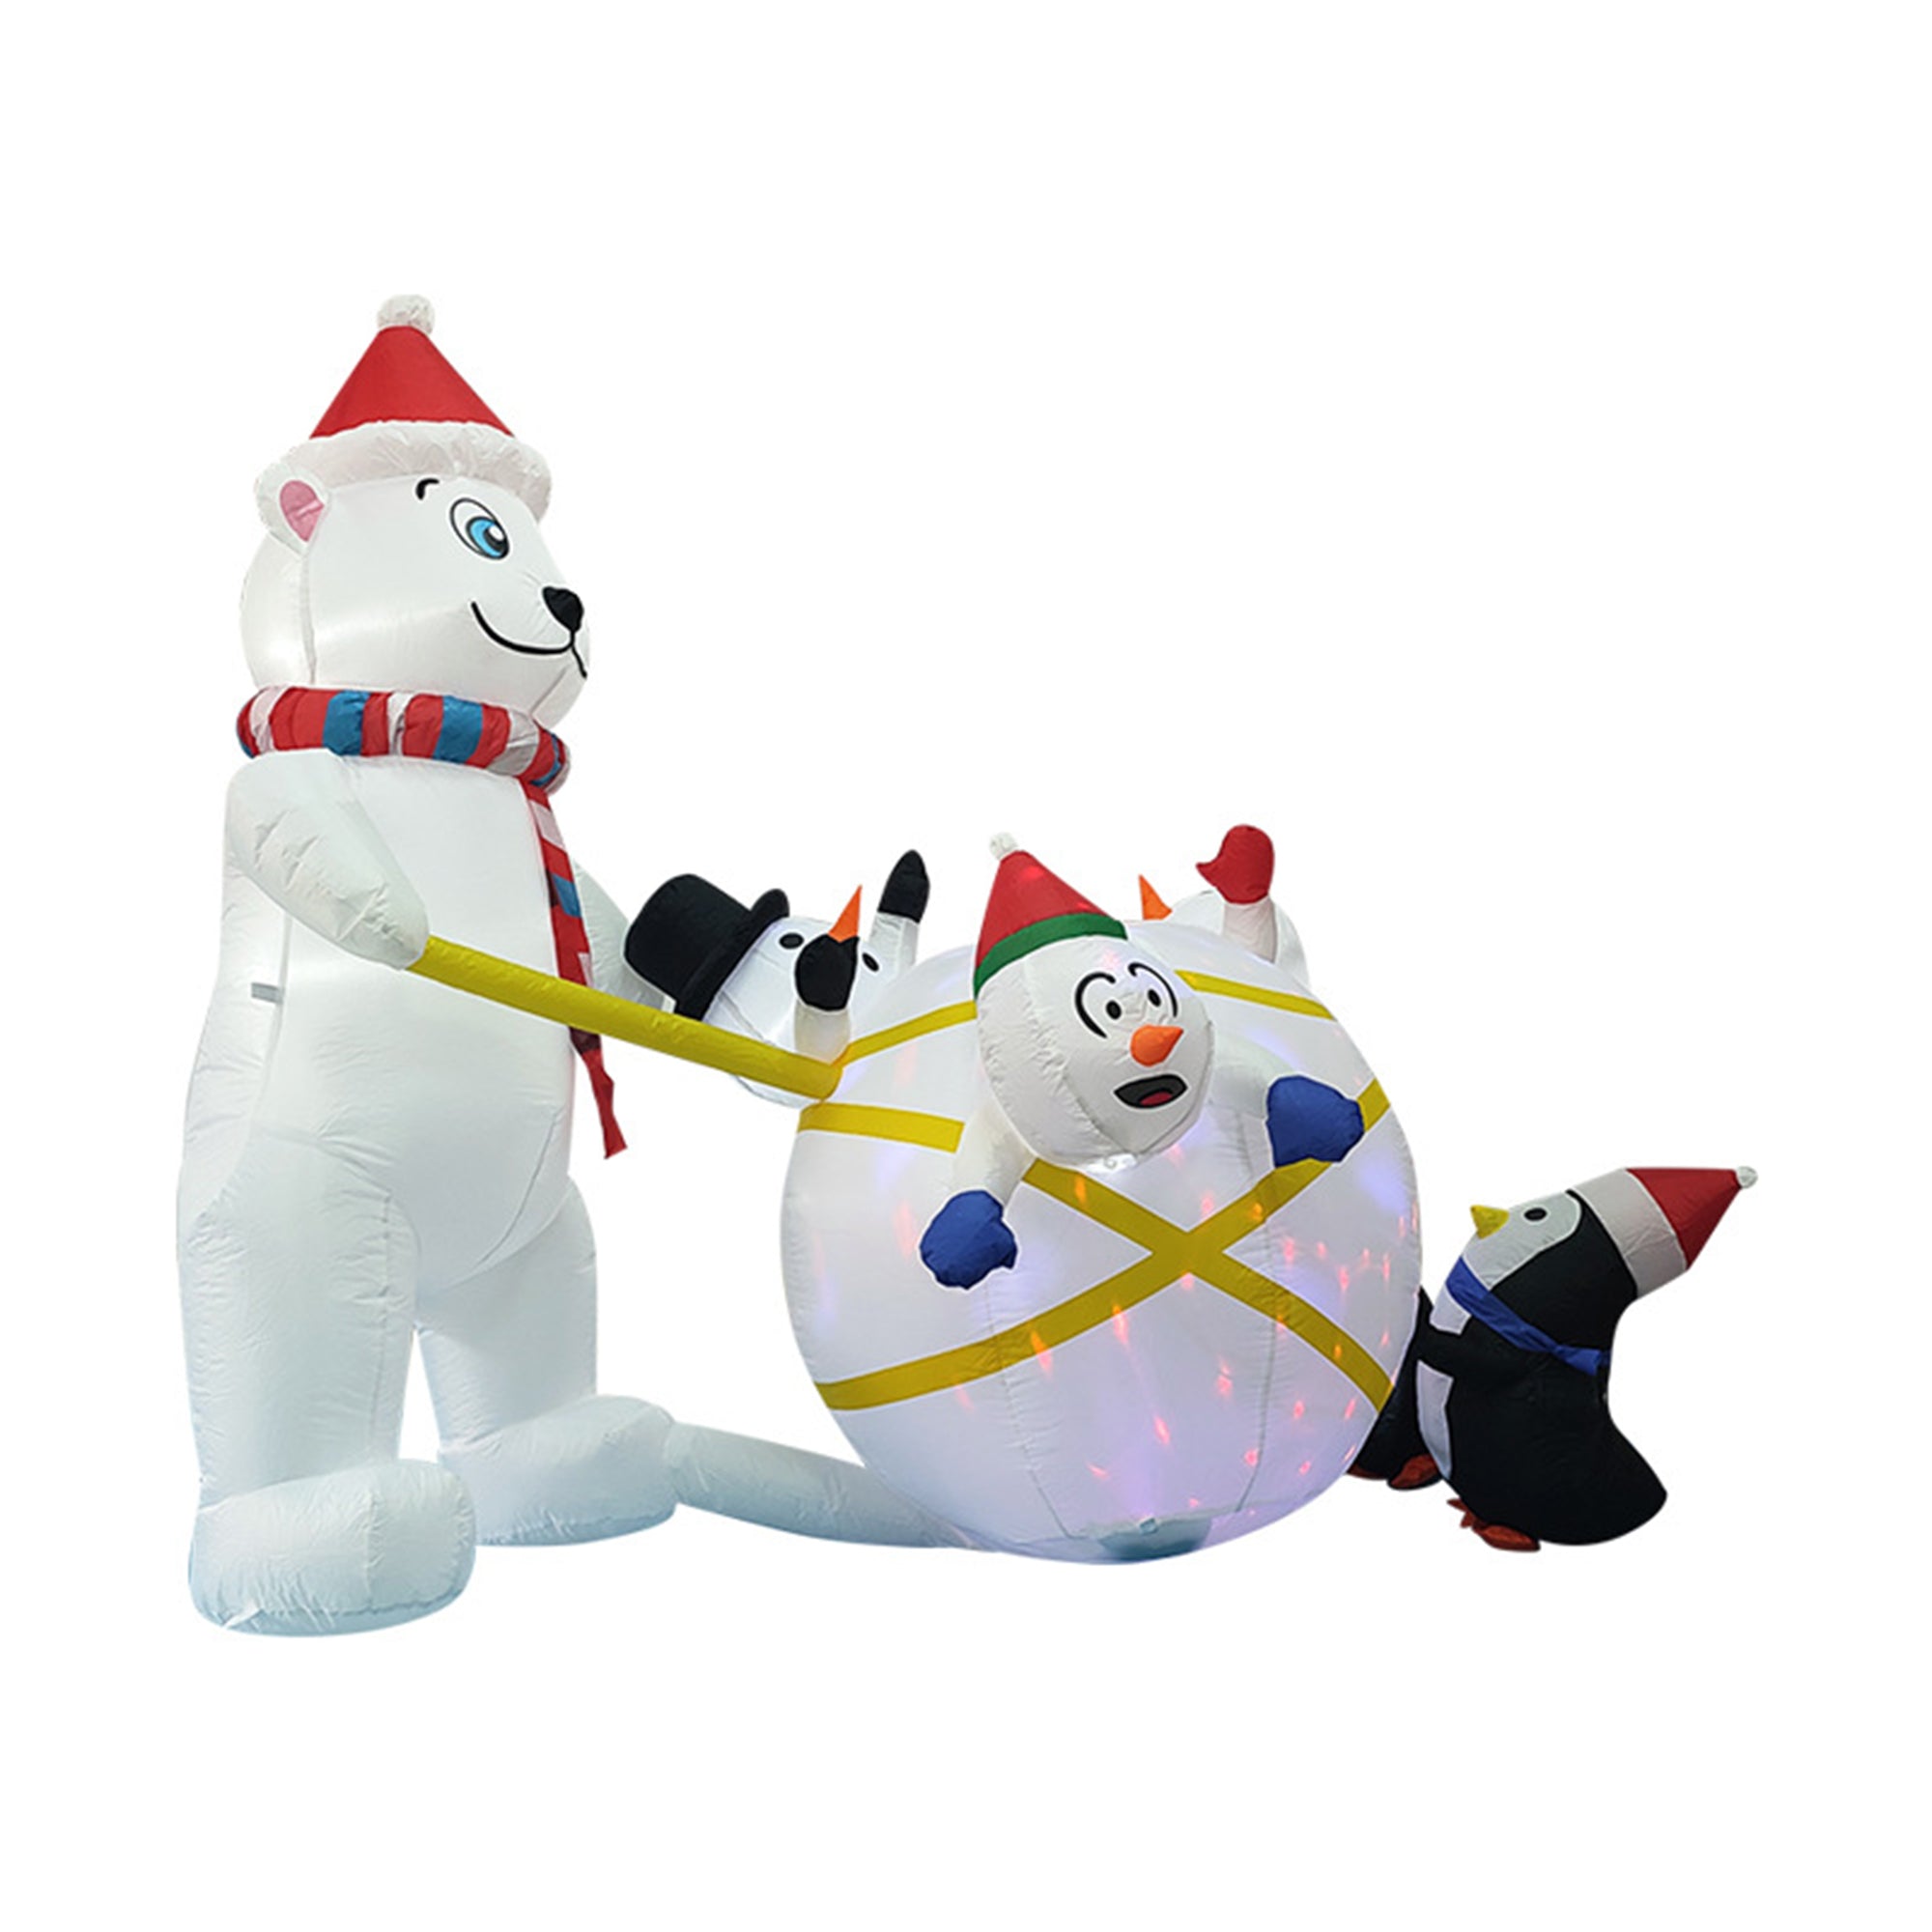 7FT Christmas Yard Inflatable, Polar Bear and Penguins Built-in LED Lights, Blow up Outdoor Christmas Decoration for Holiday, Yard, Lawn, Garden